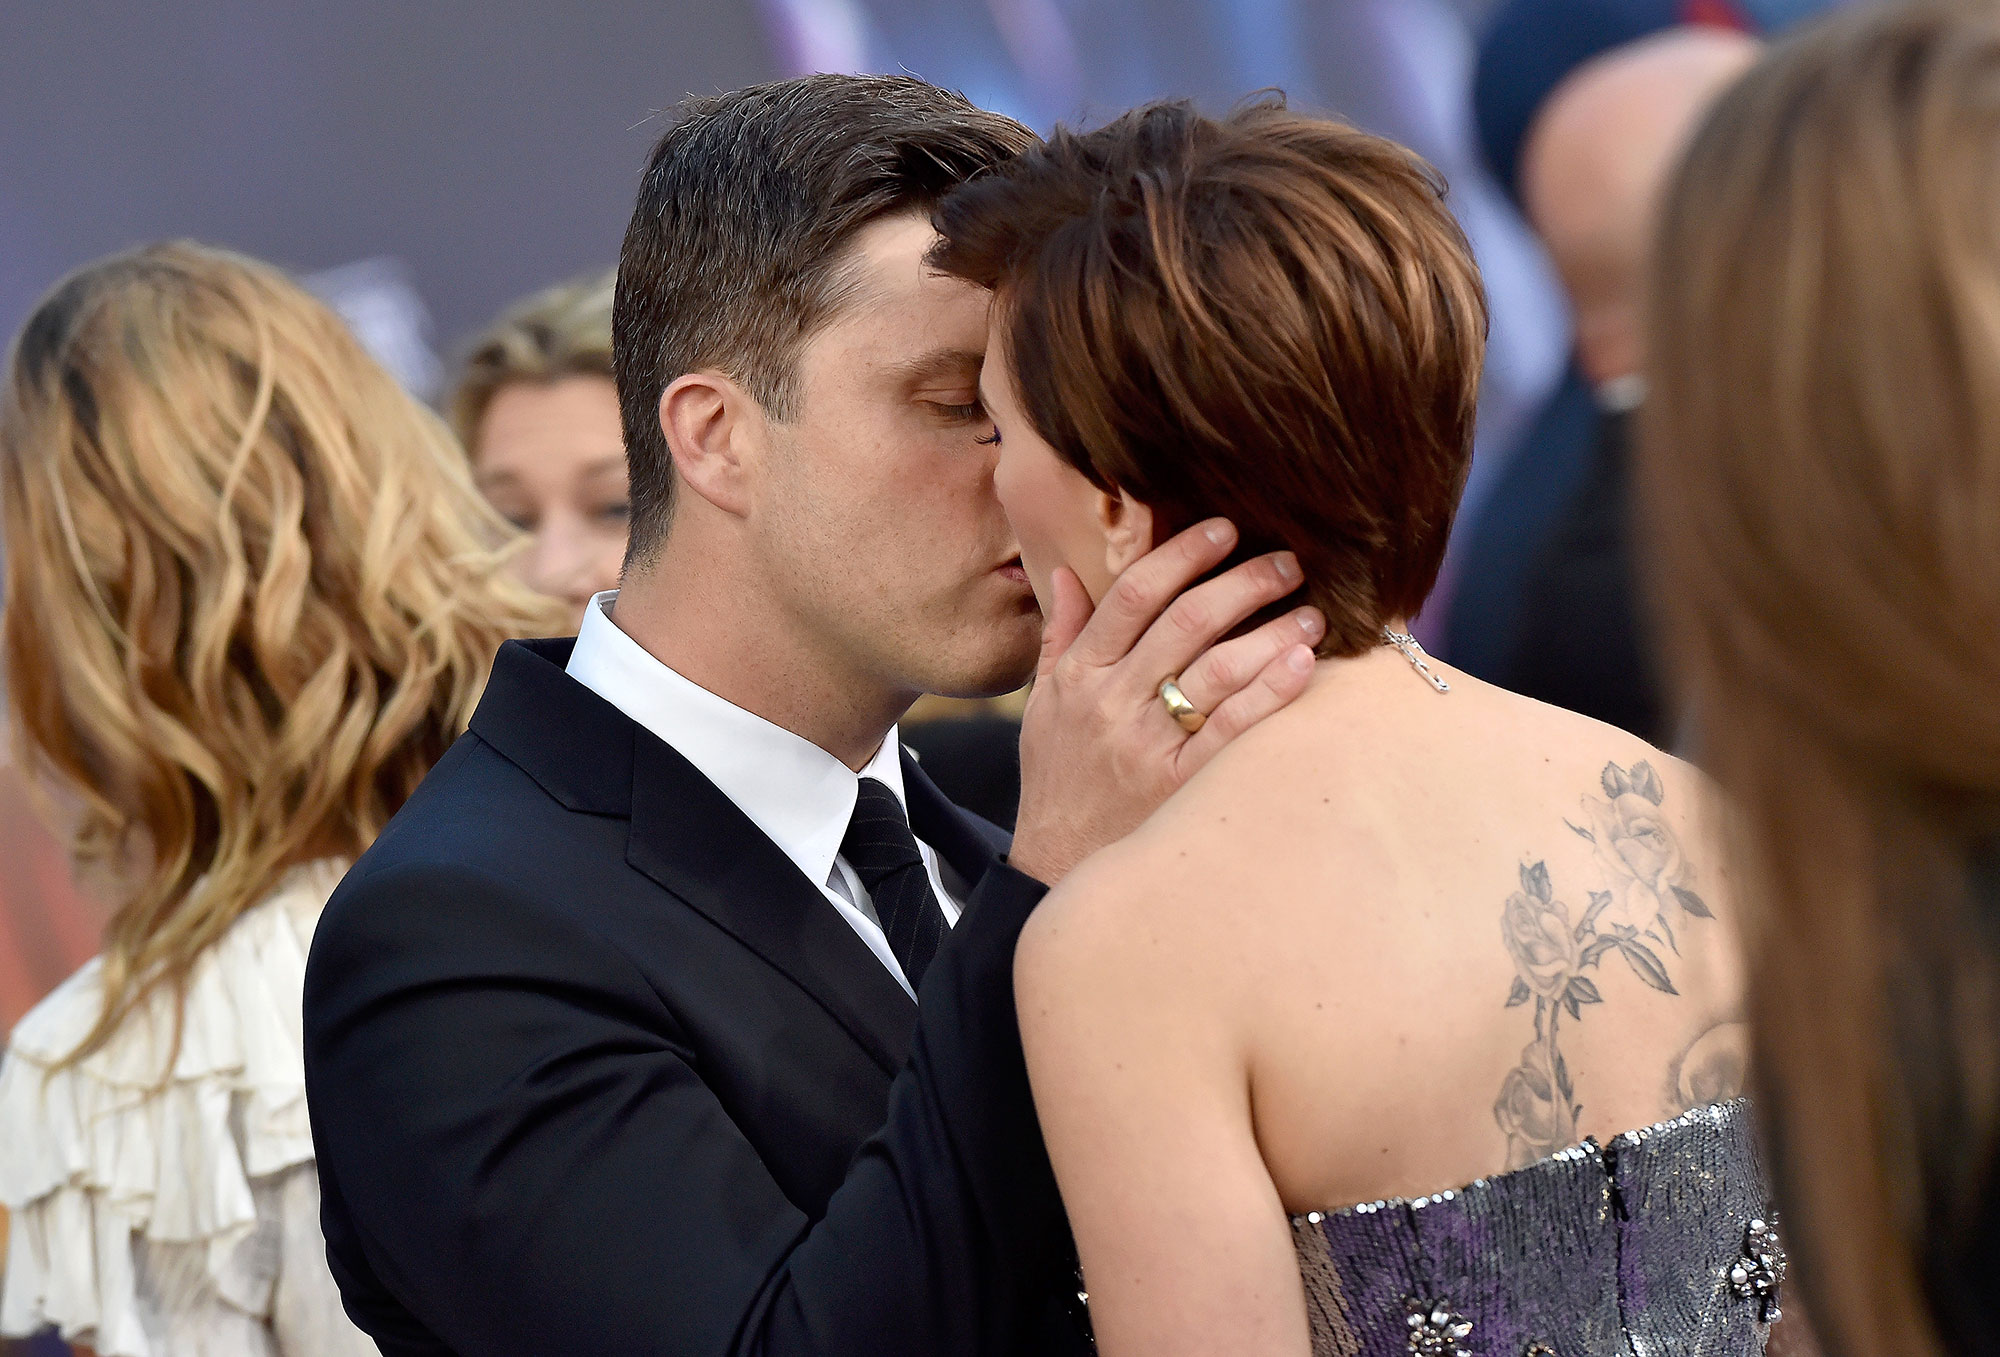 Scarlett Johansson's Husband Colin Jost: How They Met, Married - Parade